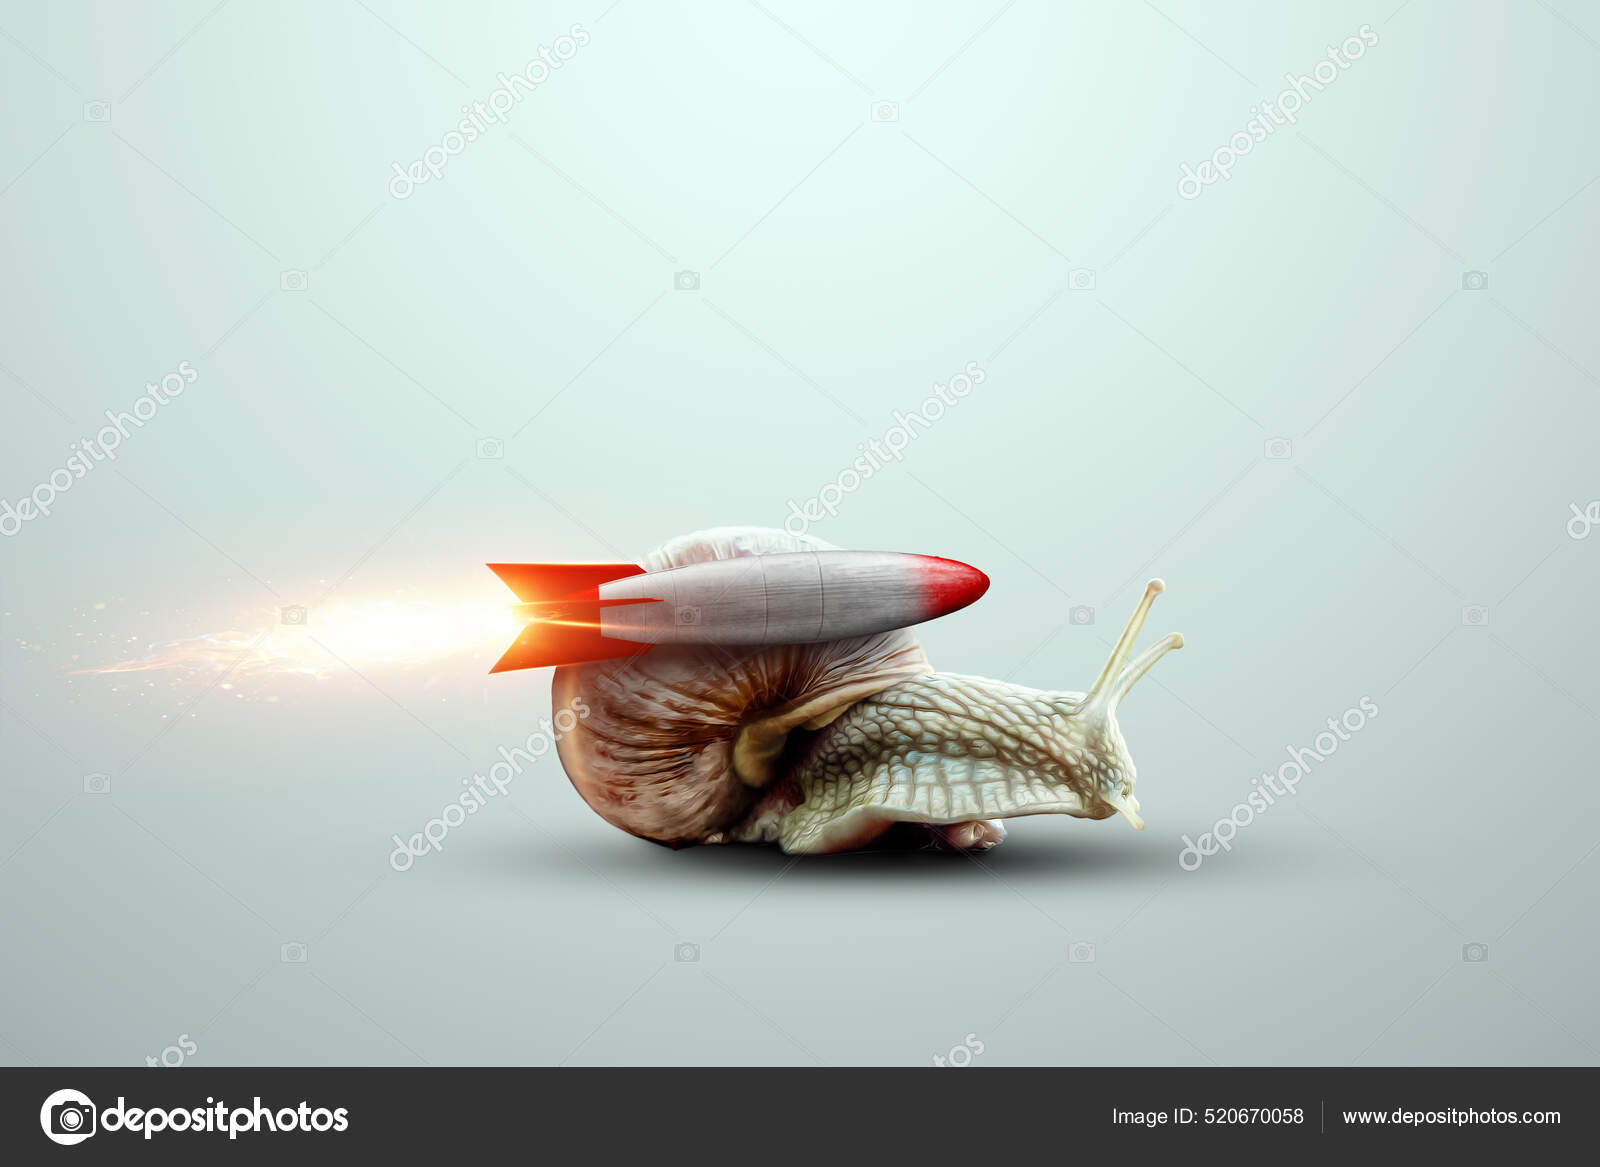 Uniqueness Creative Background Snail Moves Rocket Competitive